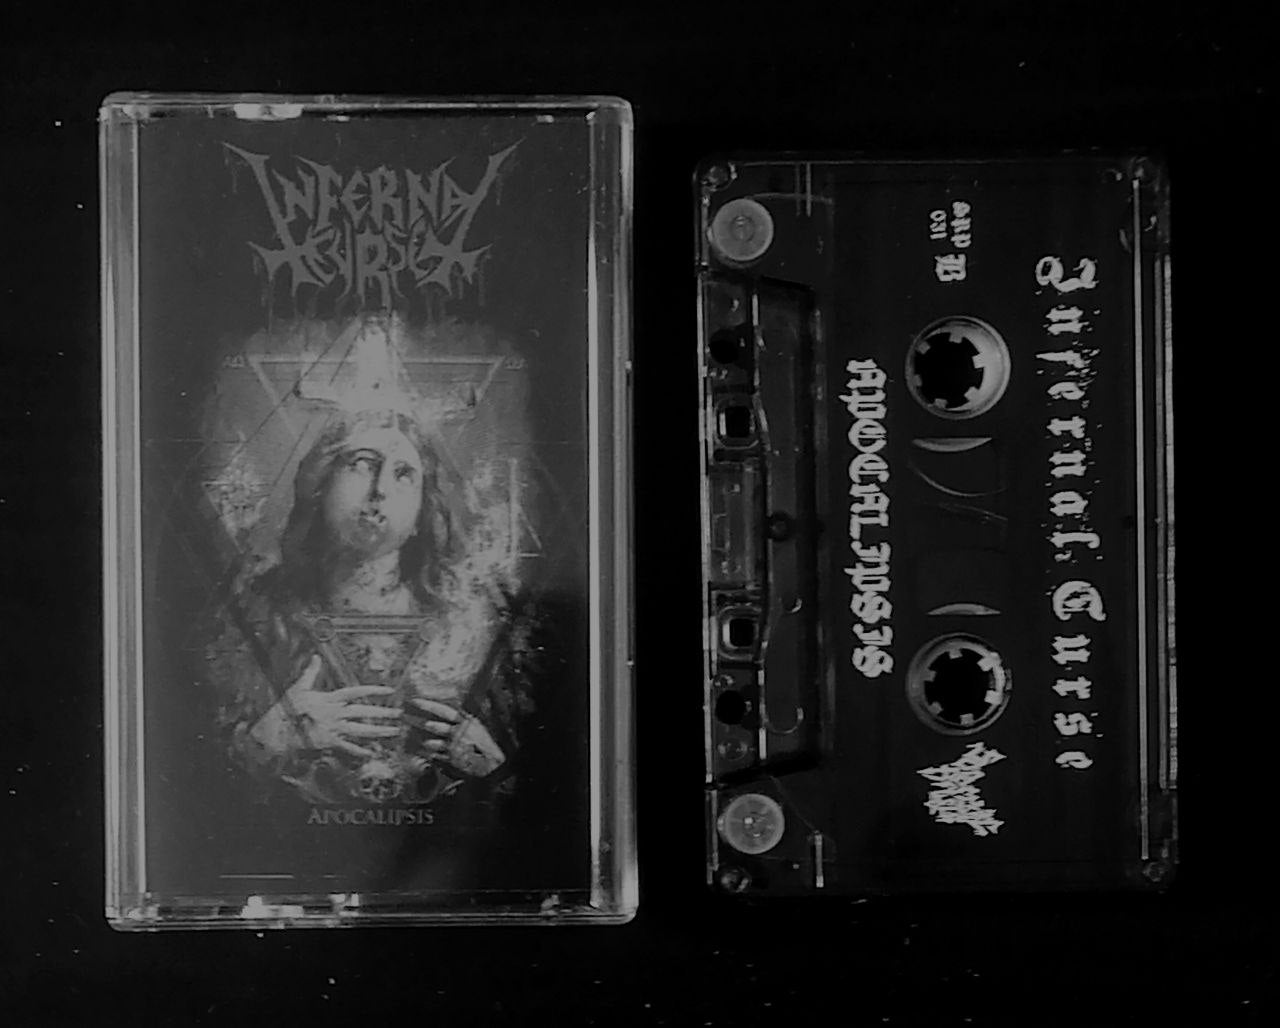 Infernal Curse (Arg) "Apocalipsis" - Pro tape ***New in Stock***